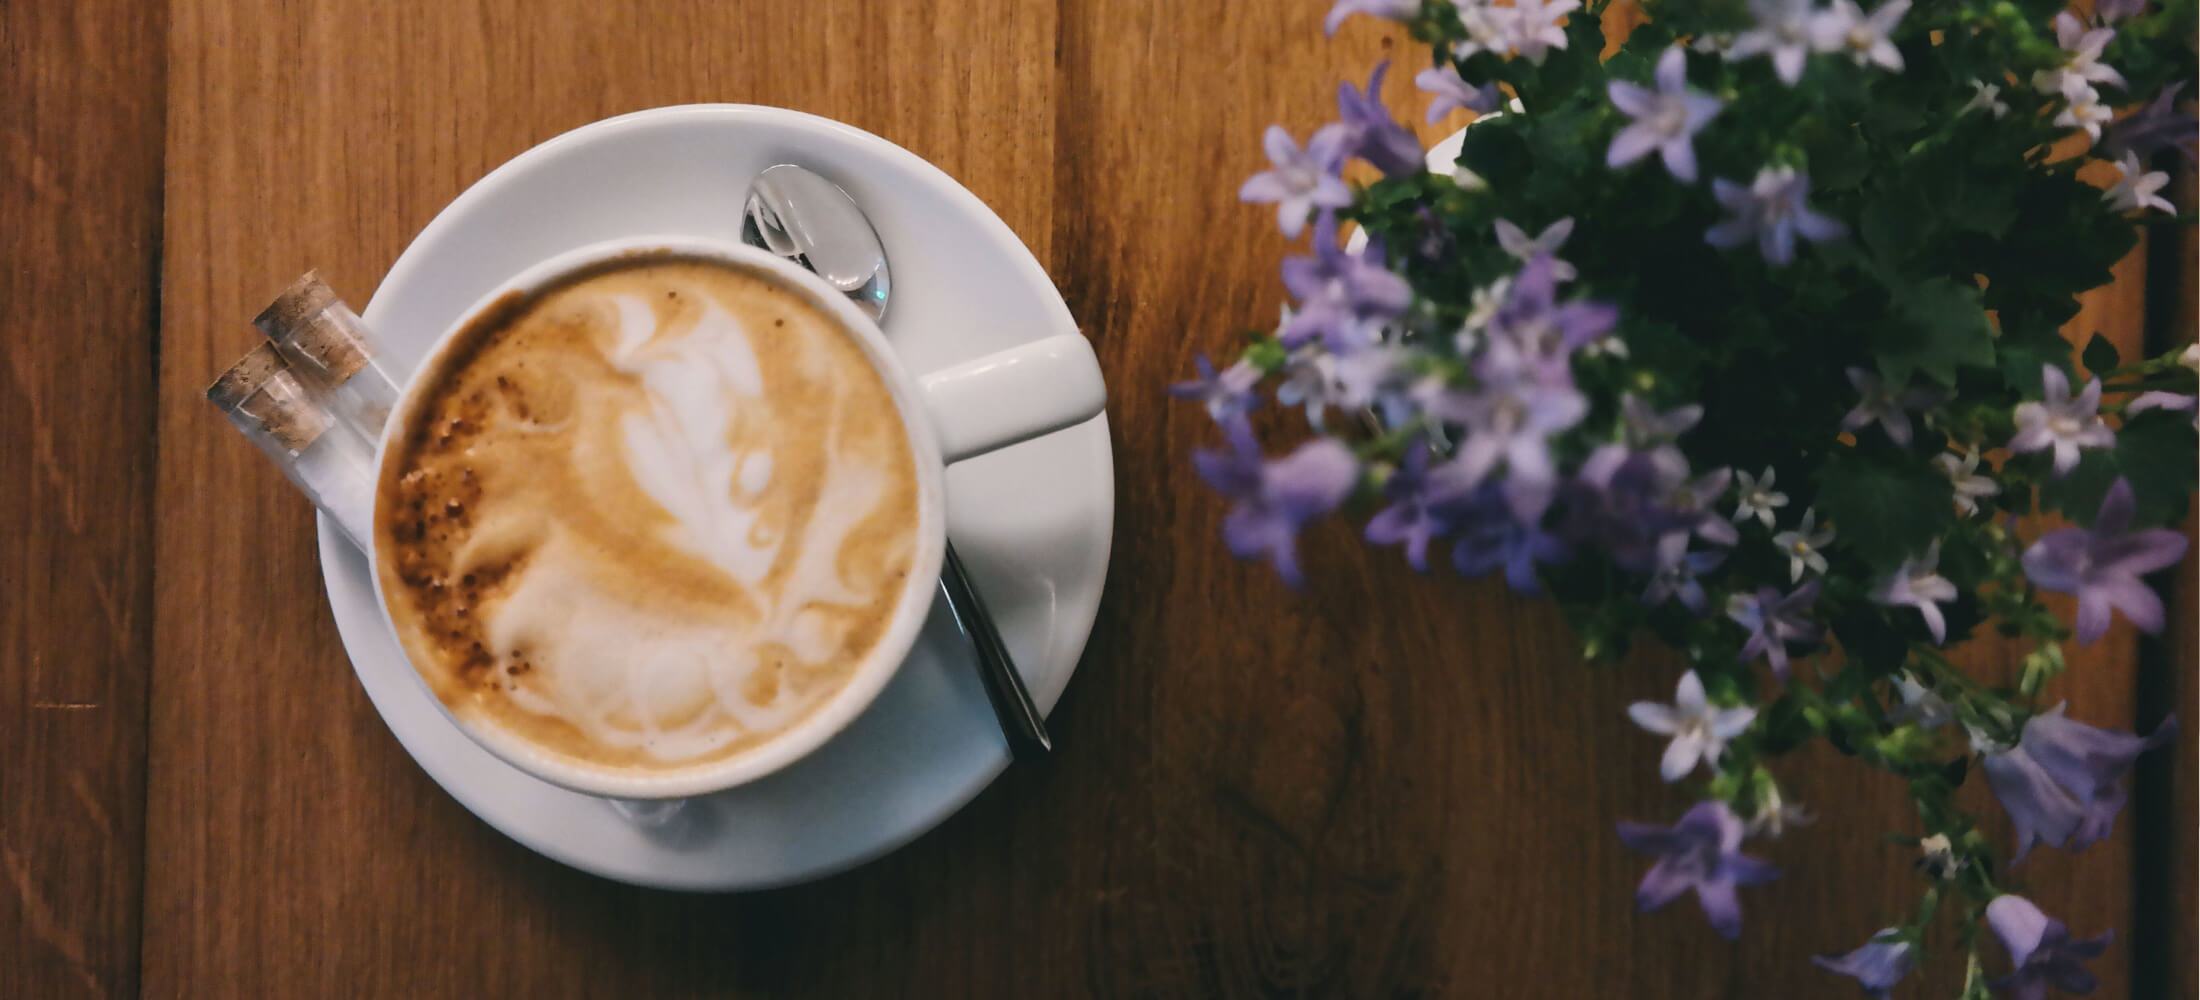 5 Great Ways to Brighten Her Morning With Coffee This Mother's Day